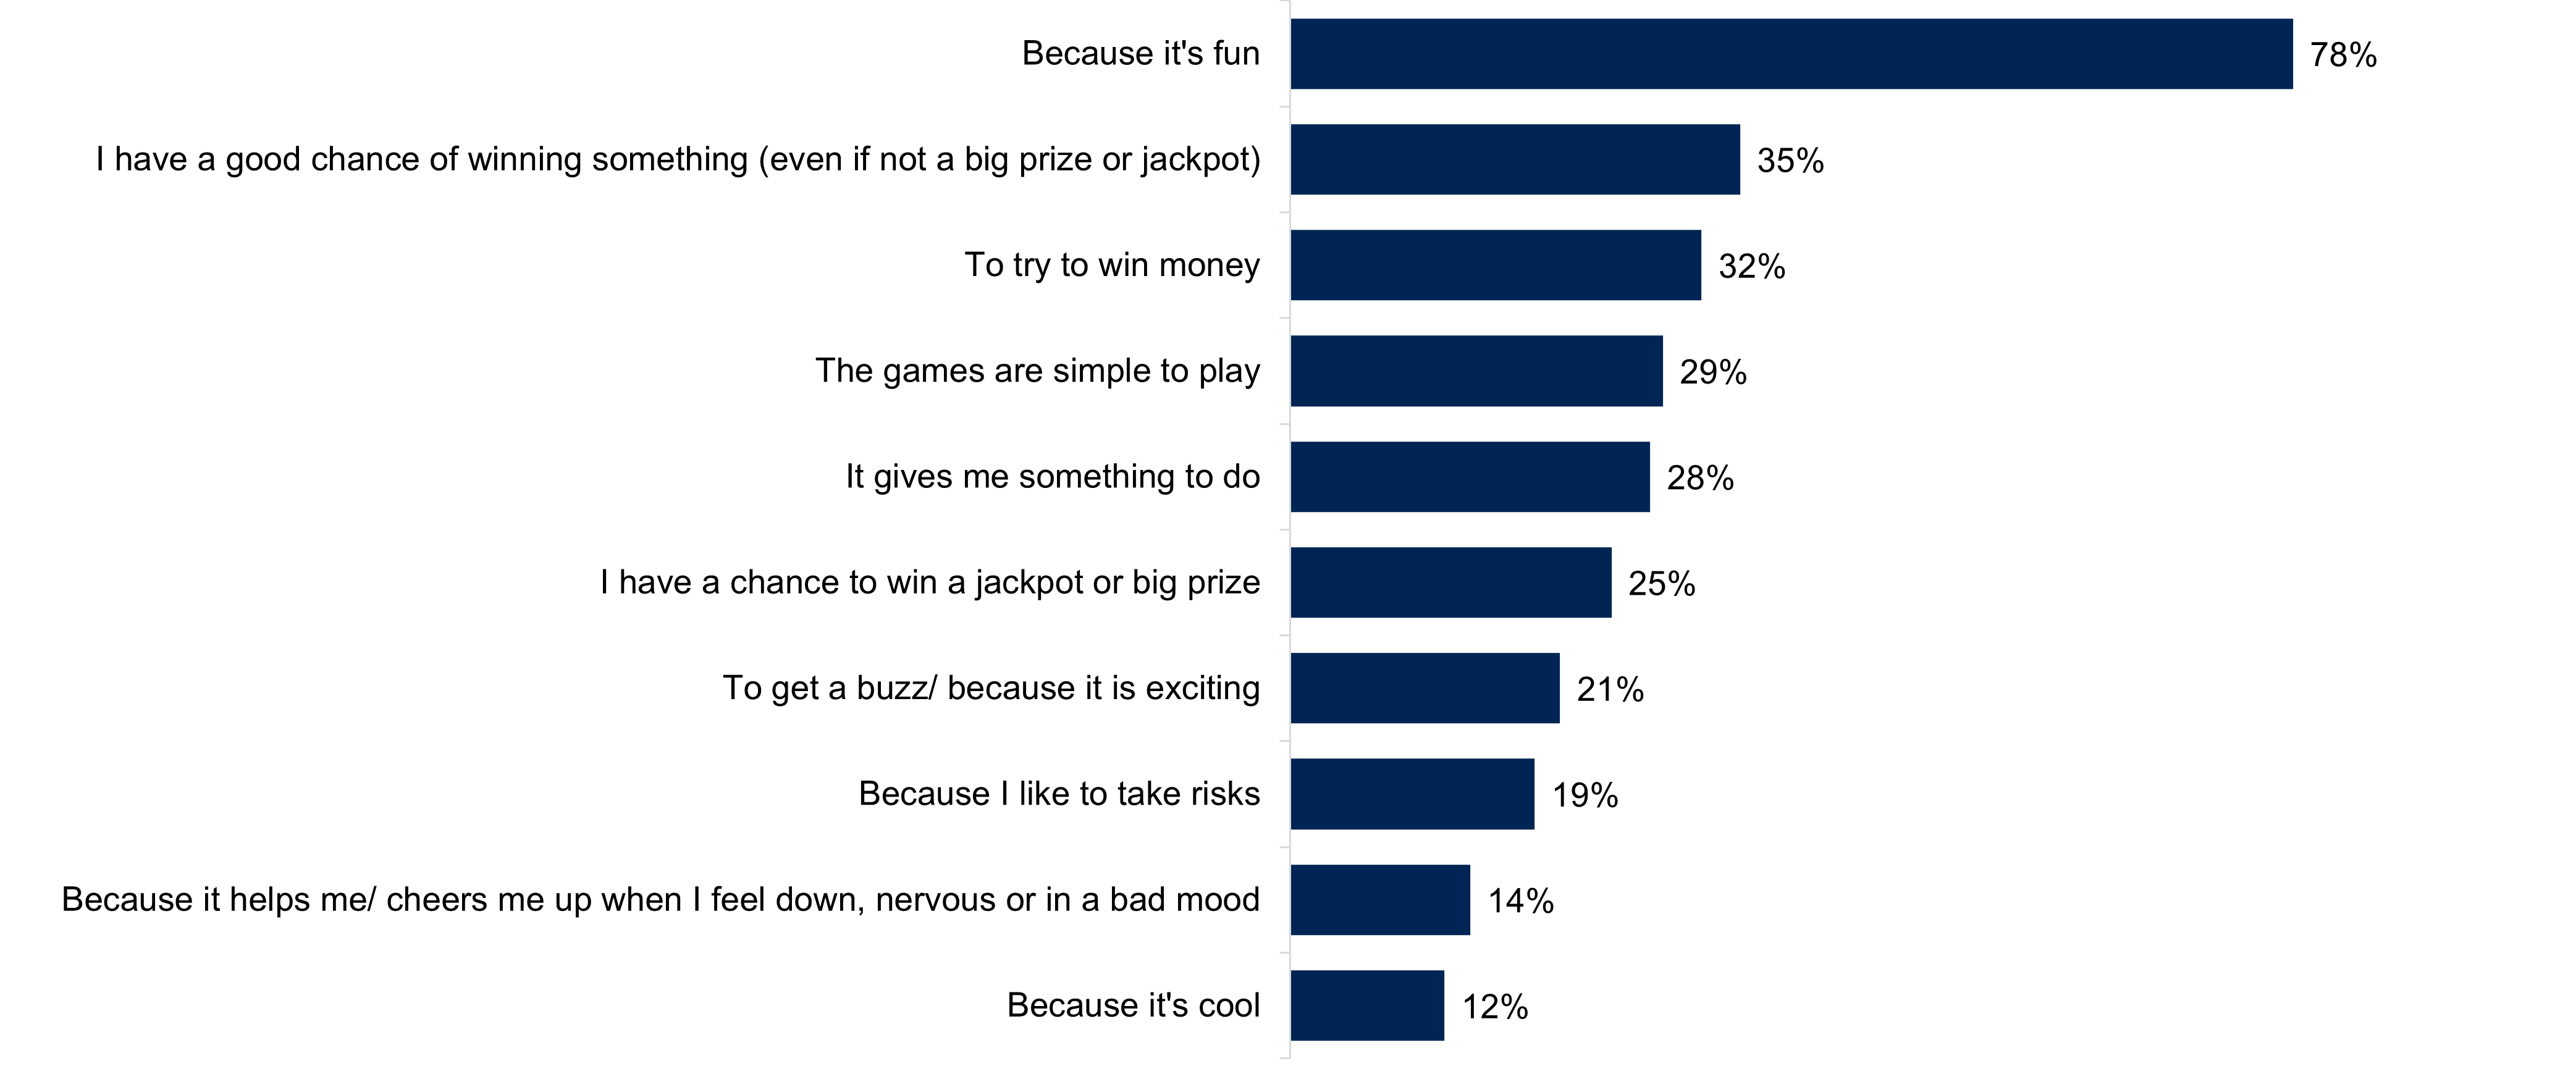 A bar chart showing the reasons why young people spent money on gambling activities. Data from the chart is provided within the following table.